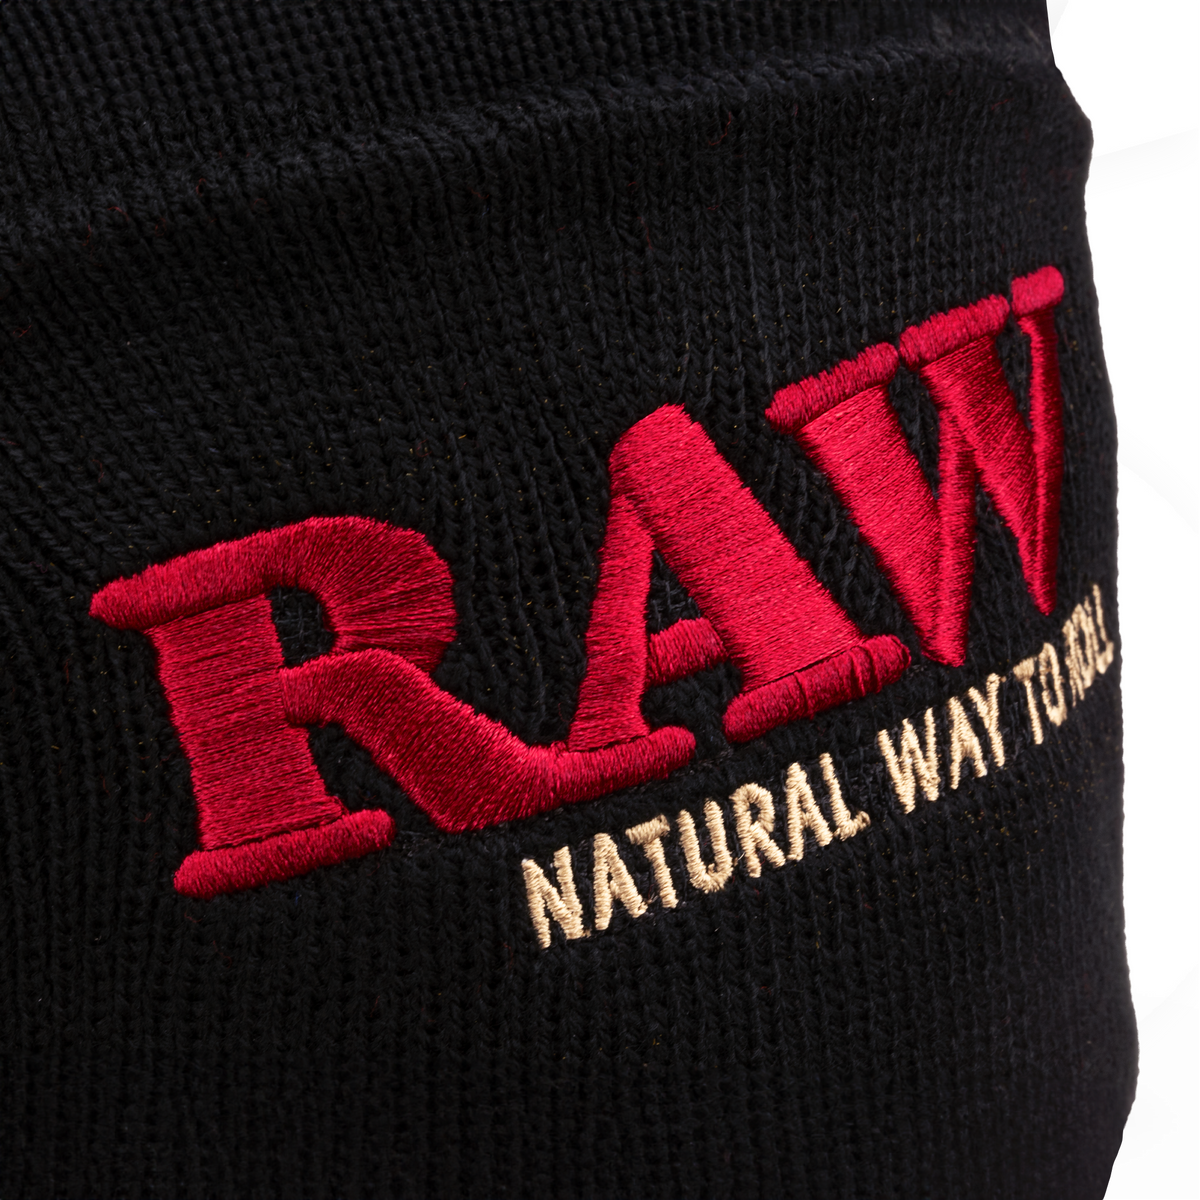 RAW Knit Beanie Hat | Black Clothing Accessories RAWU-APRP-0005 esd-official